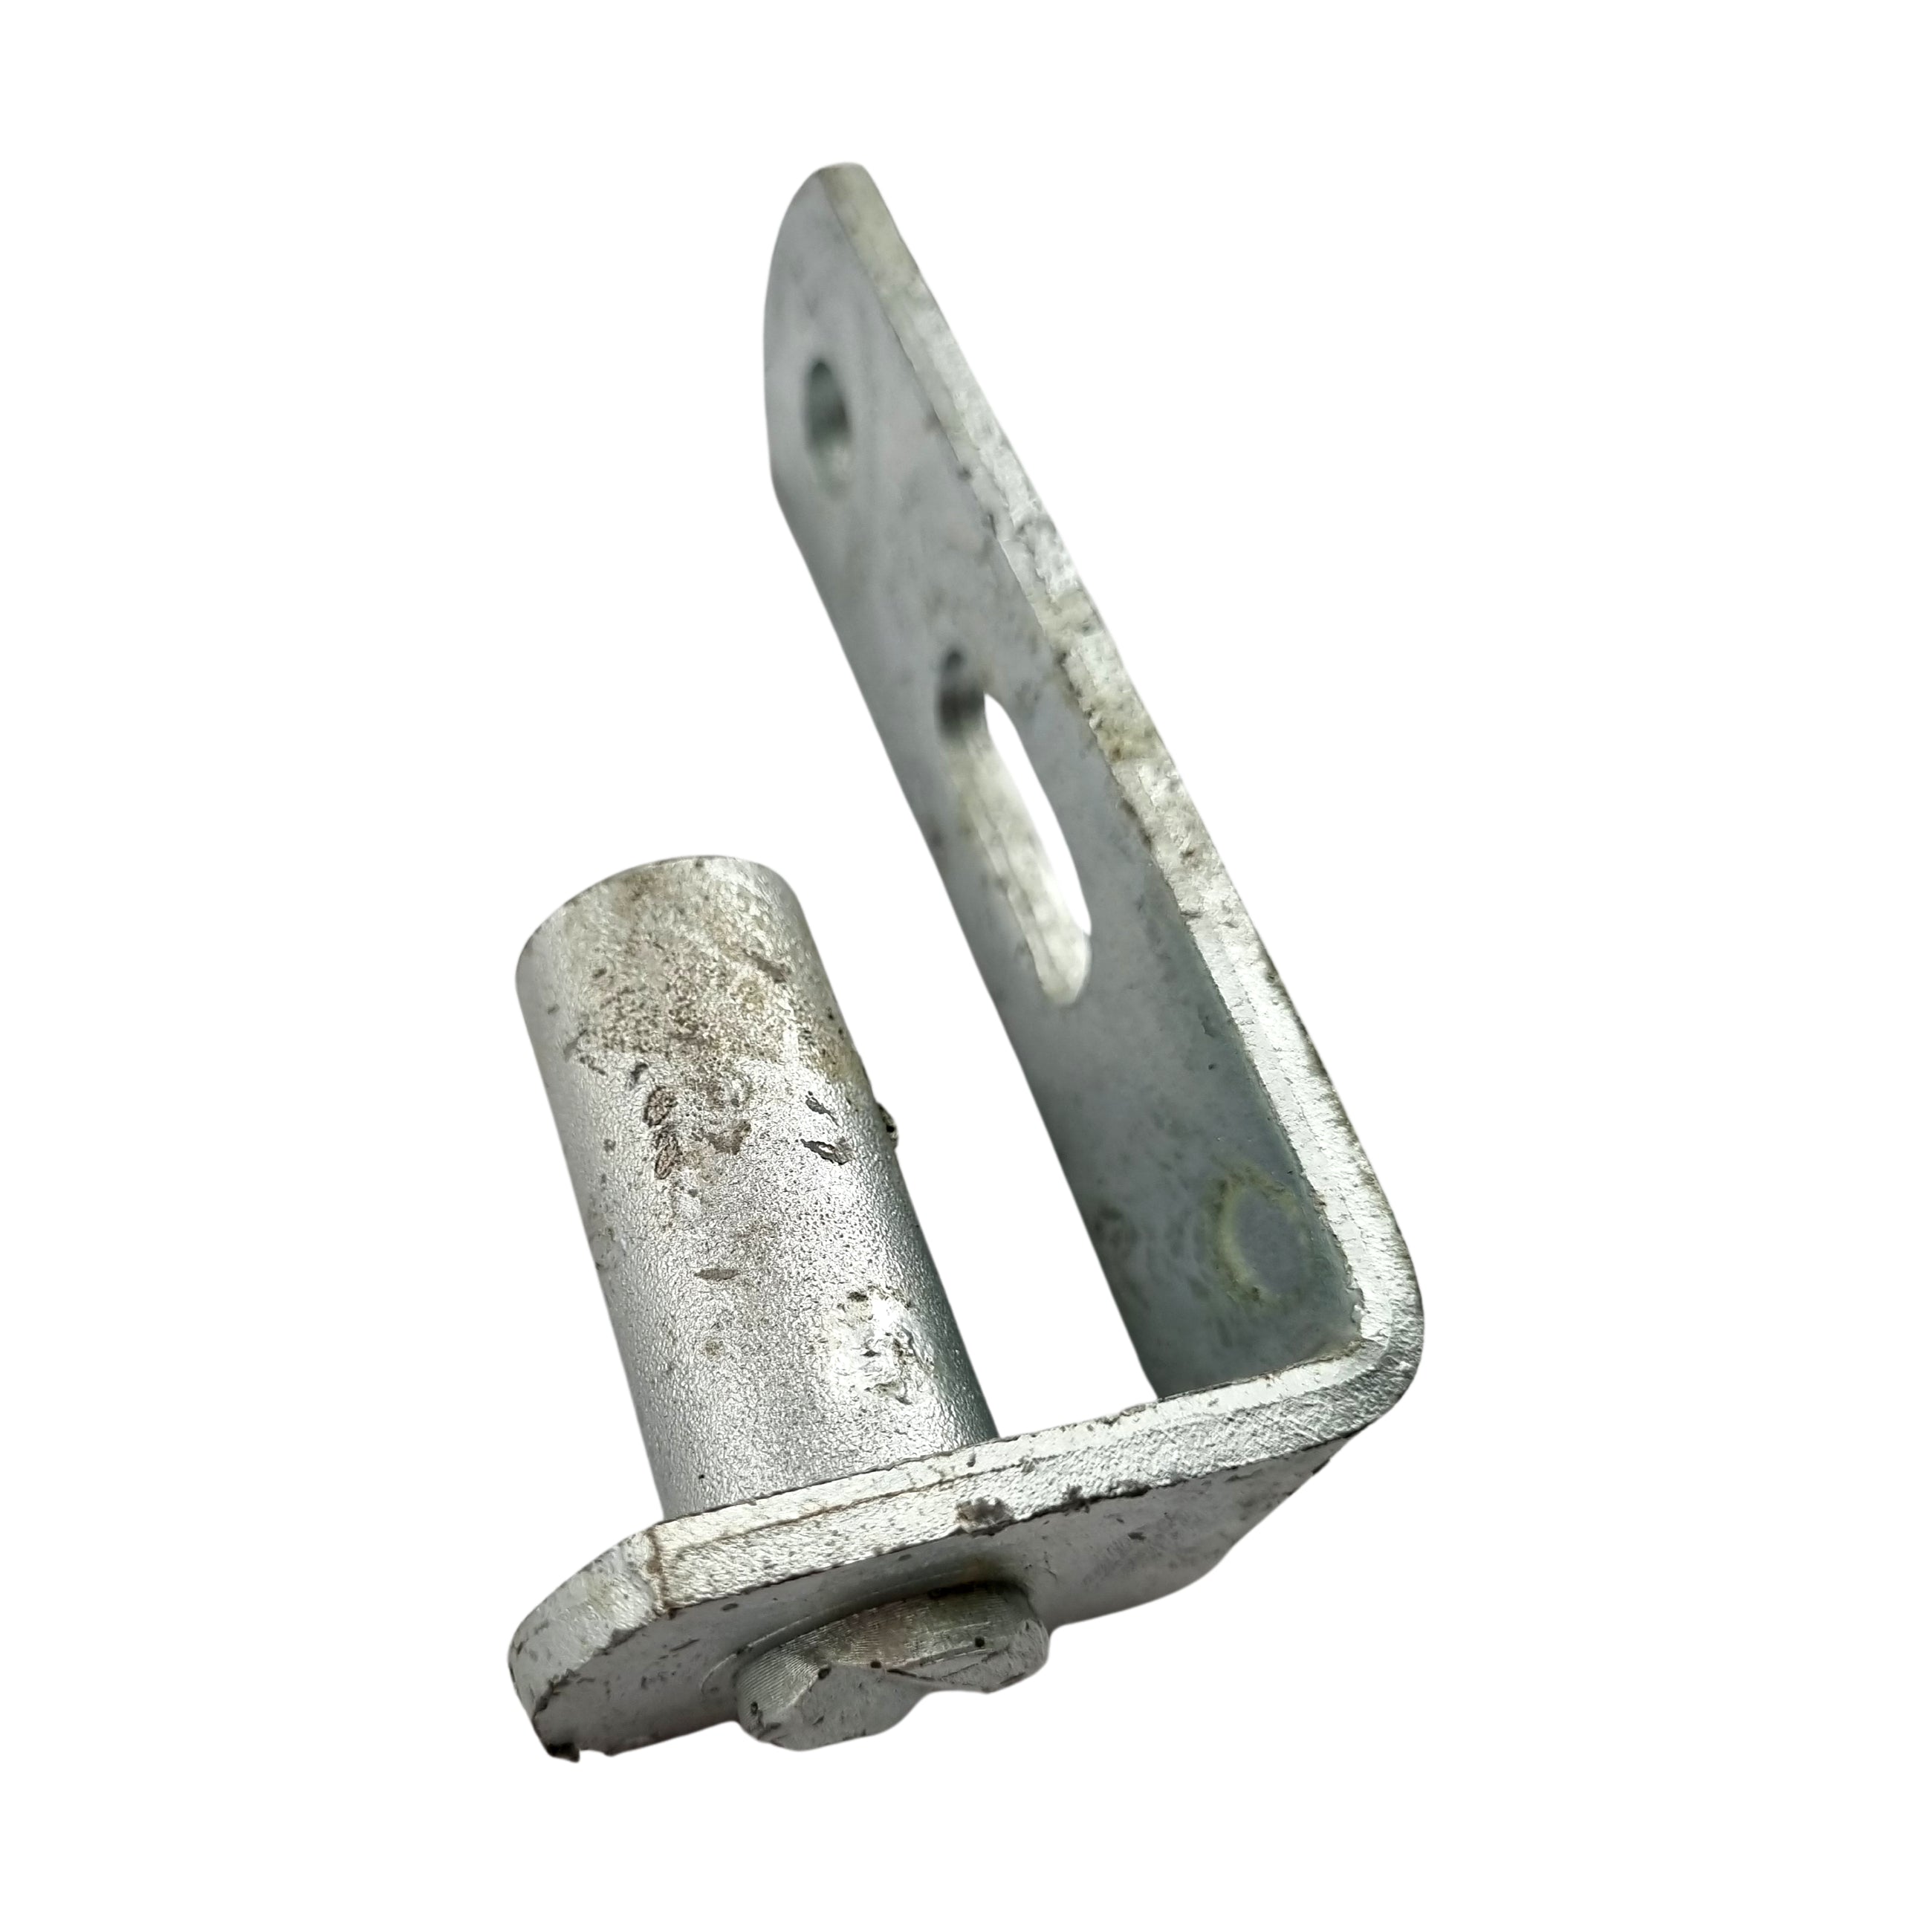 Timber Post Gudgeon - Long Plate - Steel Pin - Galvanised. Code: LPG27. Size: 25NB. Australian made. Shop fence and gate fittings online. Chain.com.au. Australia wide shipping.